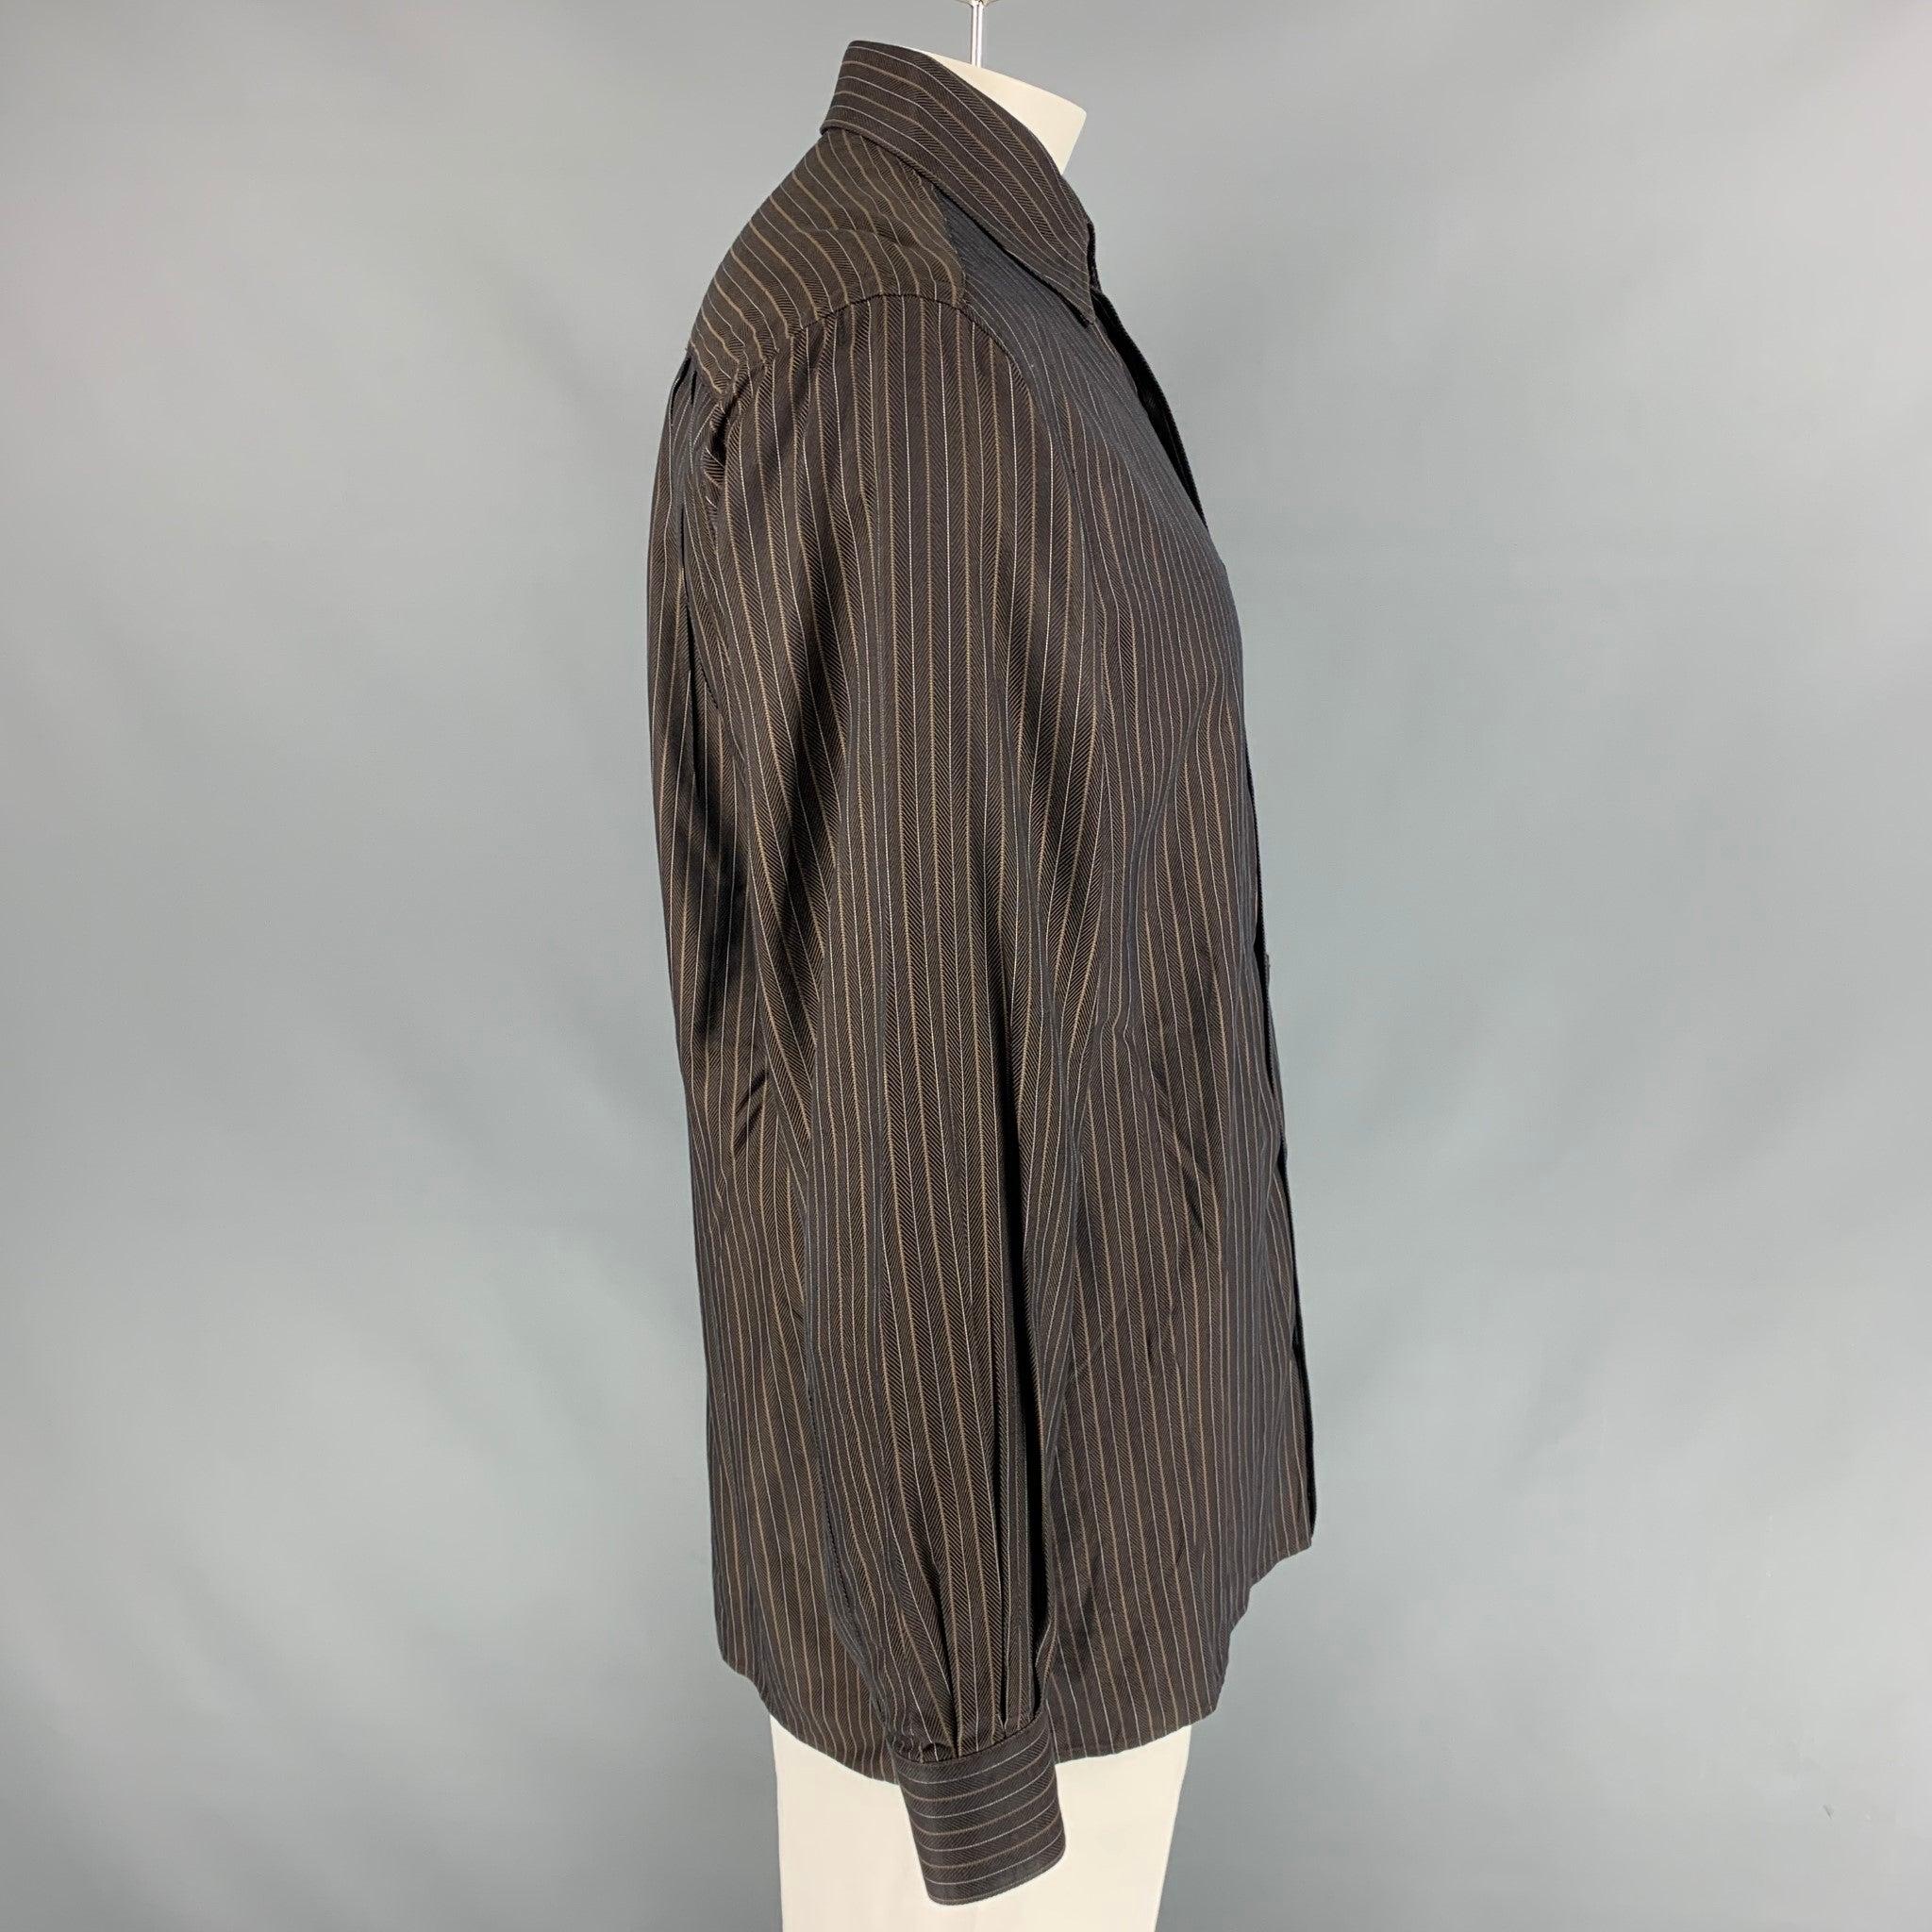 ERMENEGILDO ZEGNA Long sleeve shirt comes in brown striped cotton featuring a patch pocket at left front panel, hidden button down collar, one button round cuff, and button up closure. Made in Italy.Very Good Pre-Owned Condition. 

Marked:   L